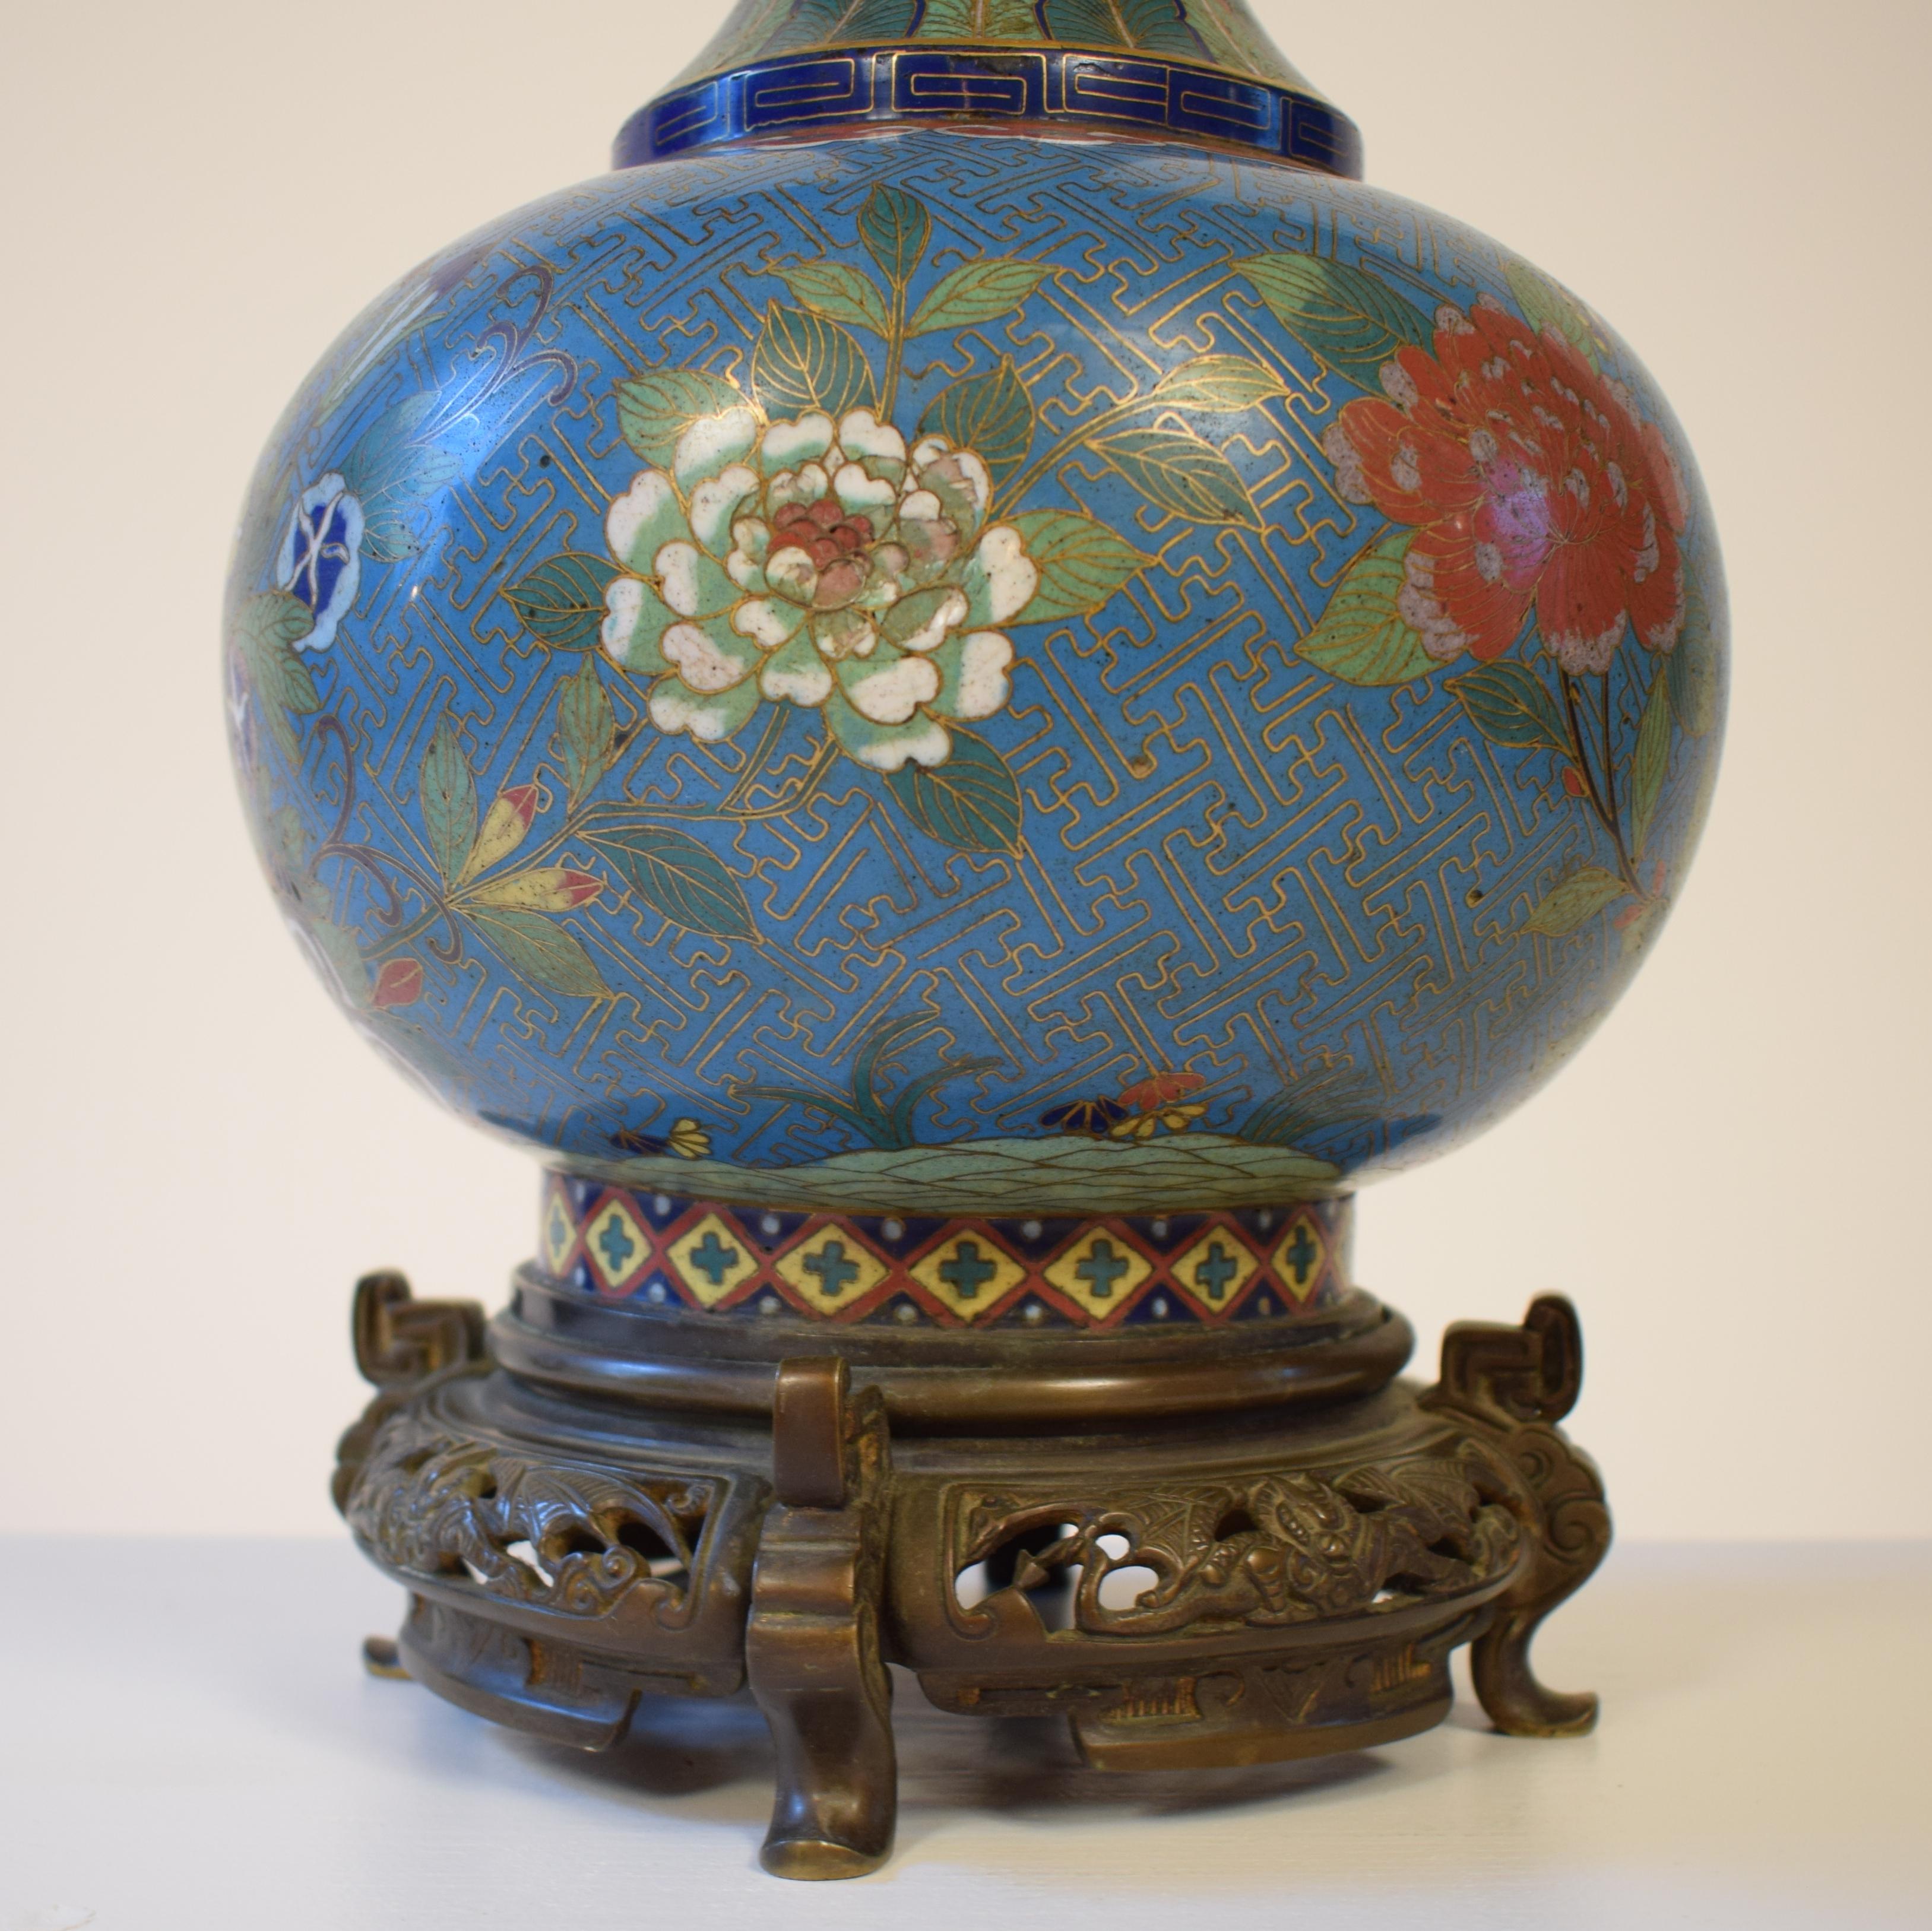 This elegant 19th century bronze-mounted Chinese table lamp was produced, circa 1880.
The beautiful hand painted enamel coated metal vase with the deep blue color and the great details makes this lamp very special.